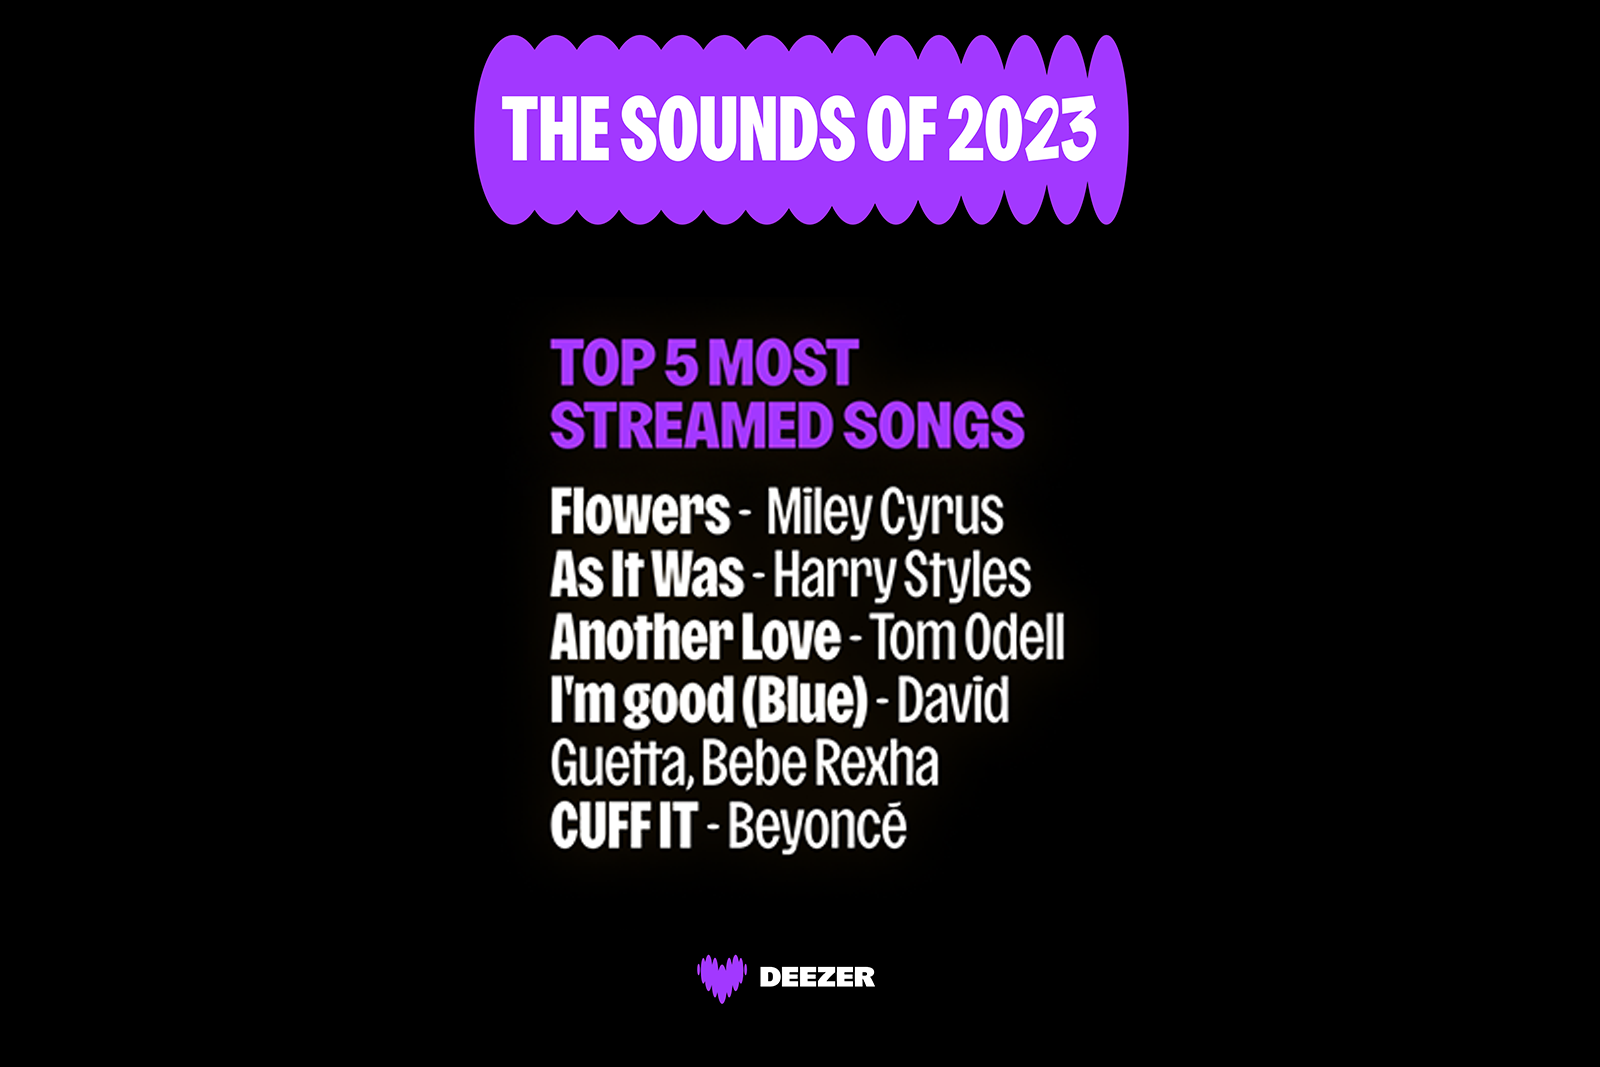 my deezer year most streamed songs